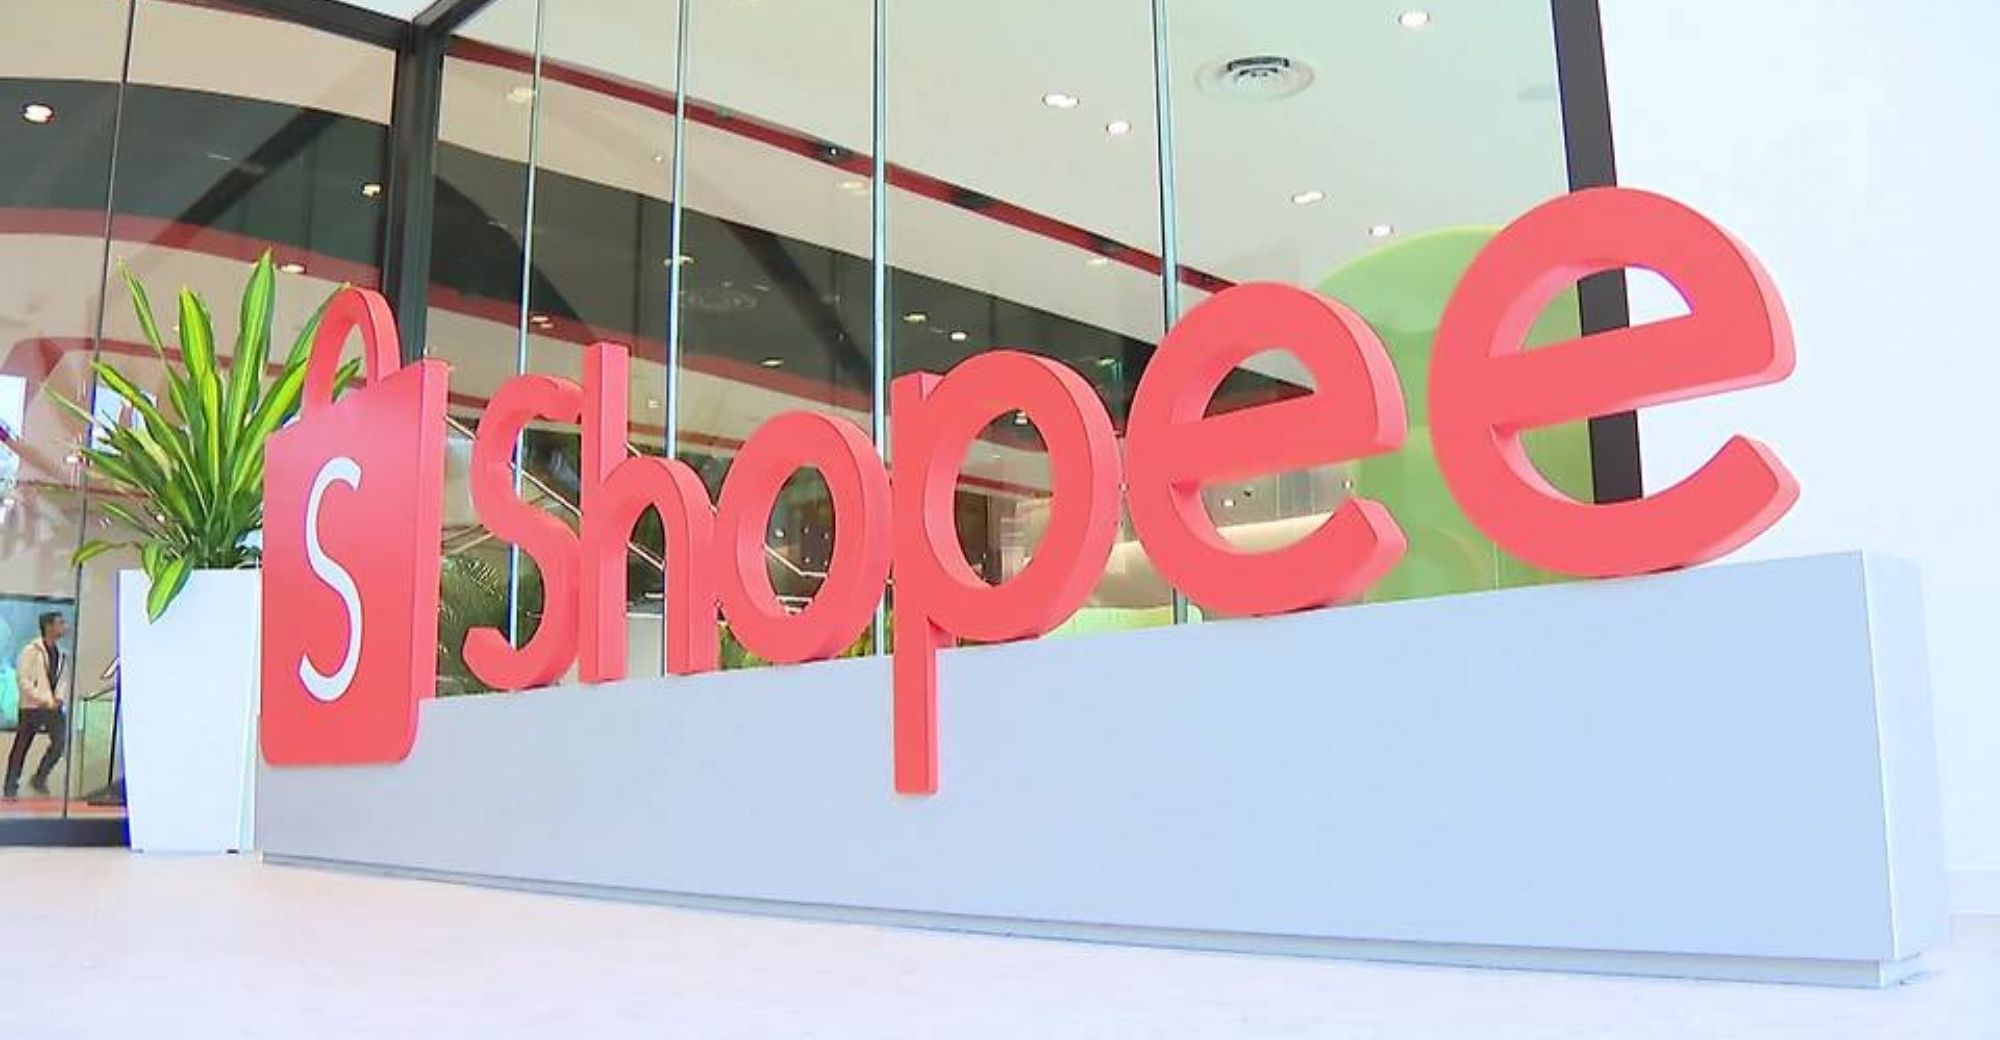 Shopee Confirms It Required Laid-Off Workers to Compensate for Computer Damage